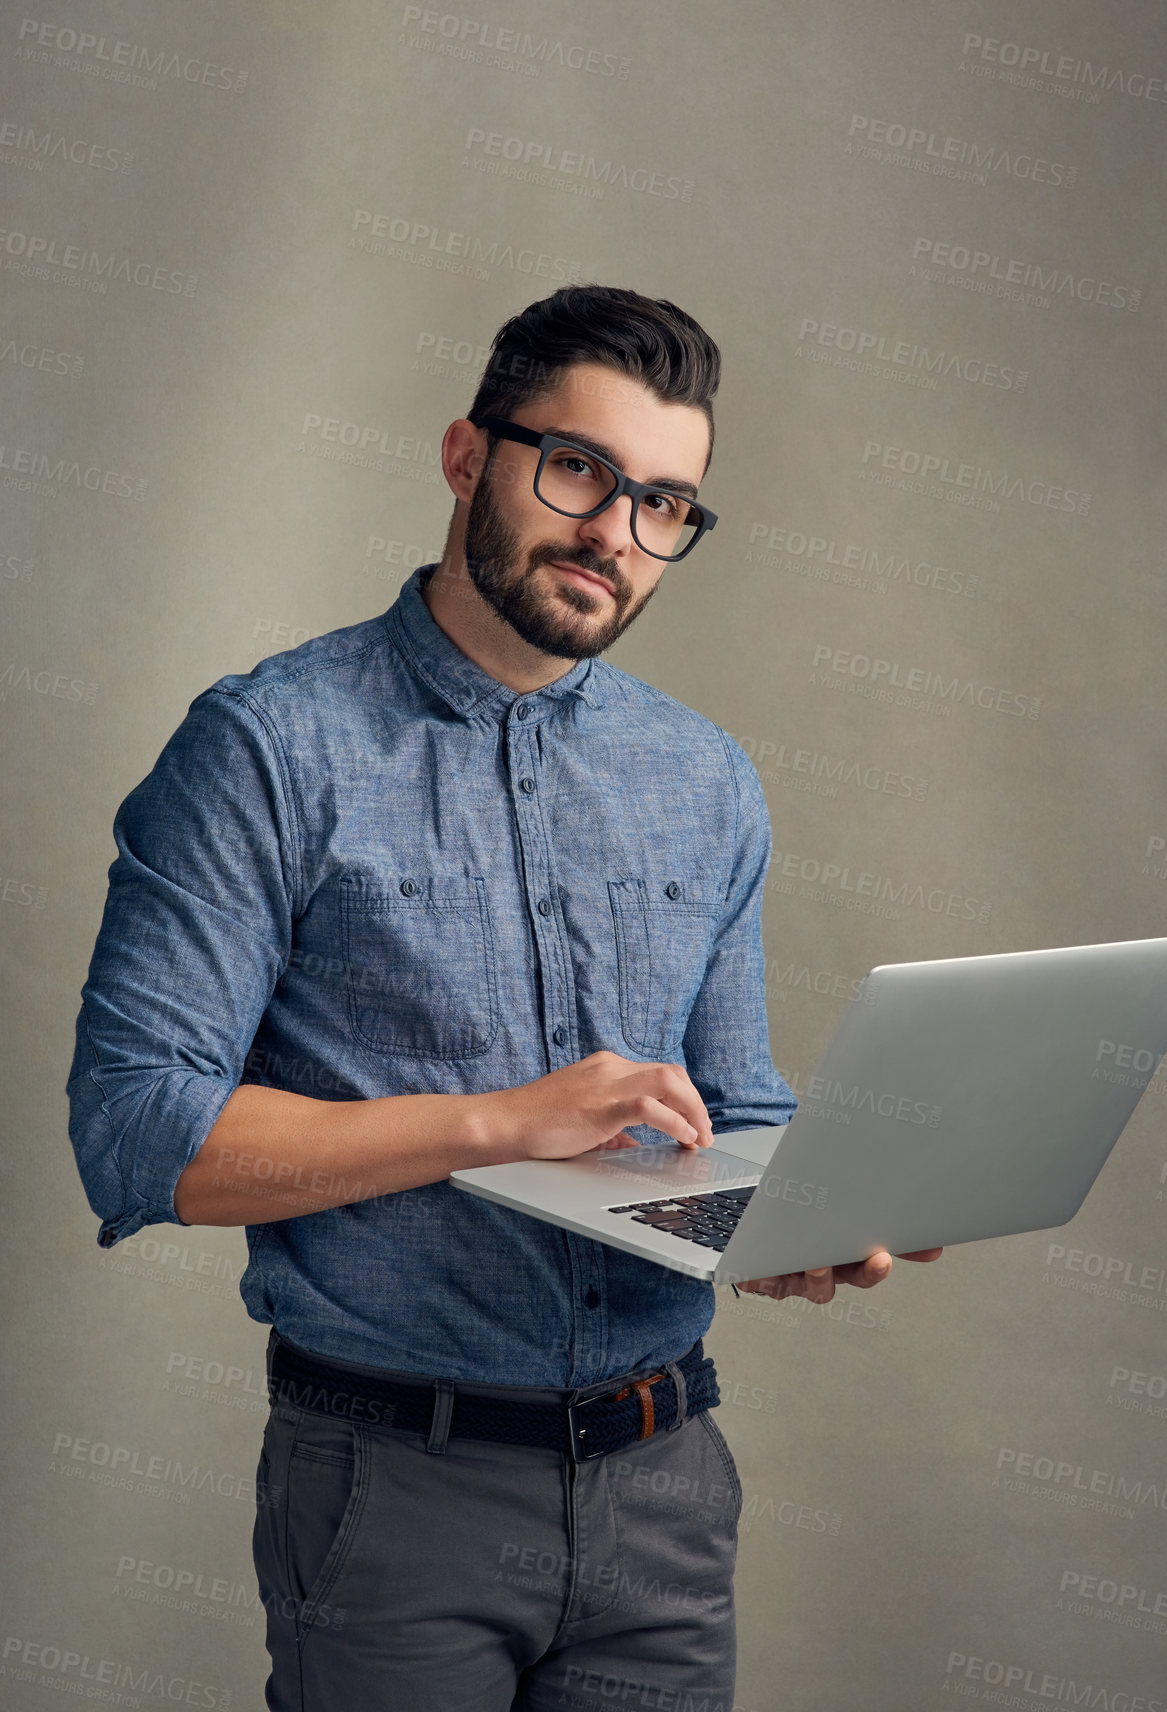 Buy stock photo Studio portrait of a handsome young man using a laptop against a grey background